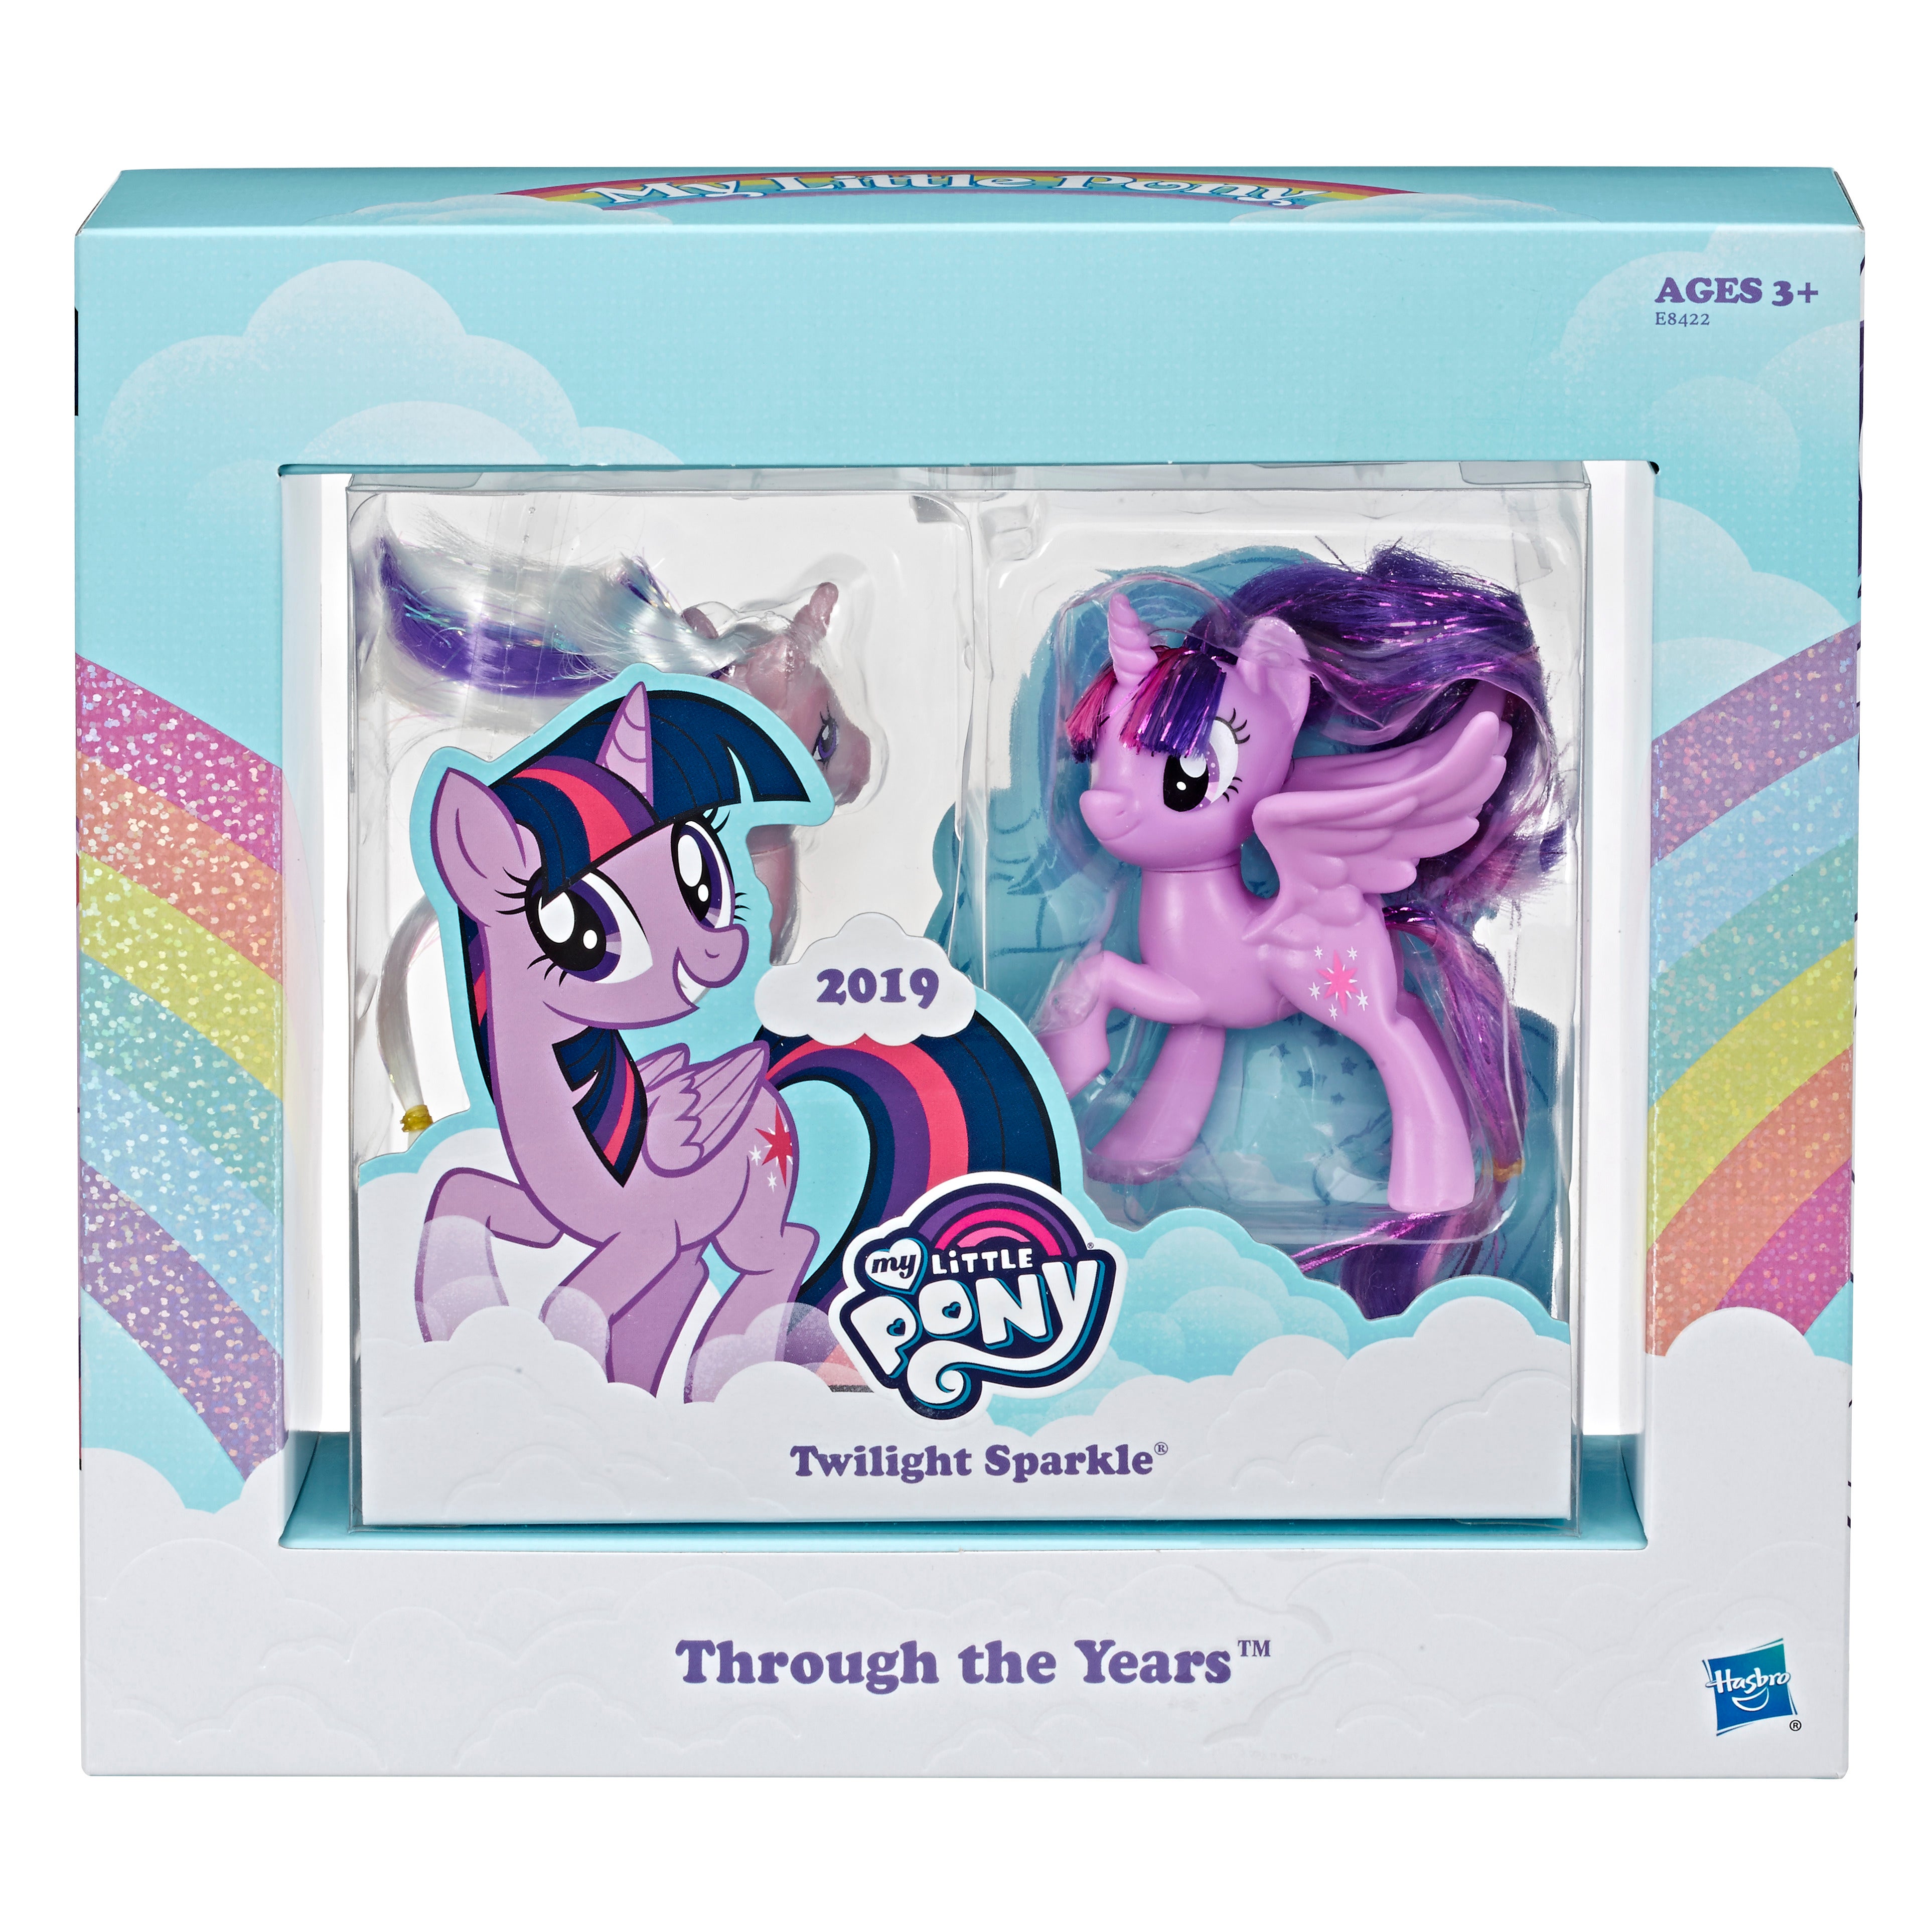 hasbro's my little pony comiccon exclusive is a reminder